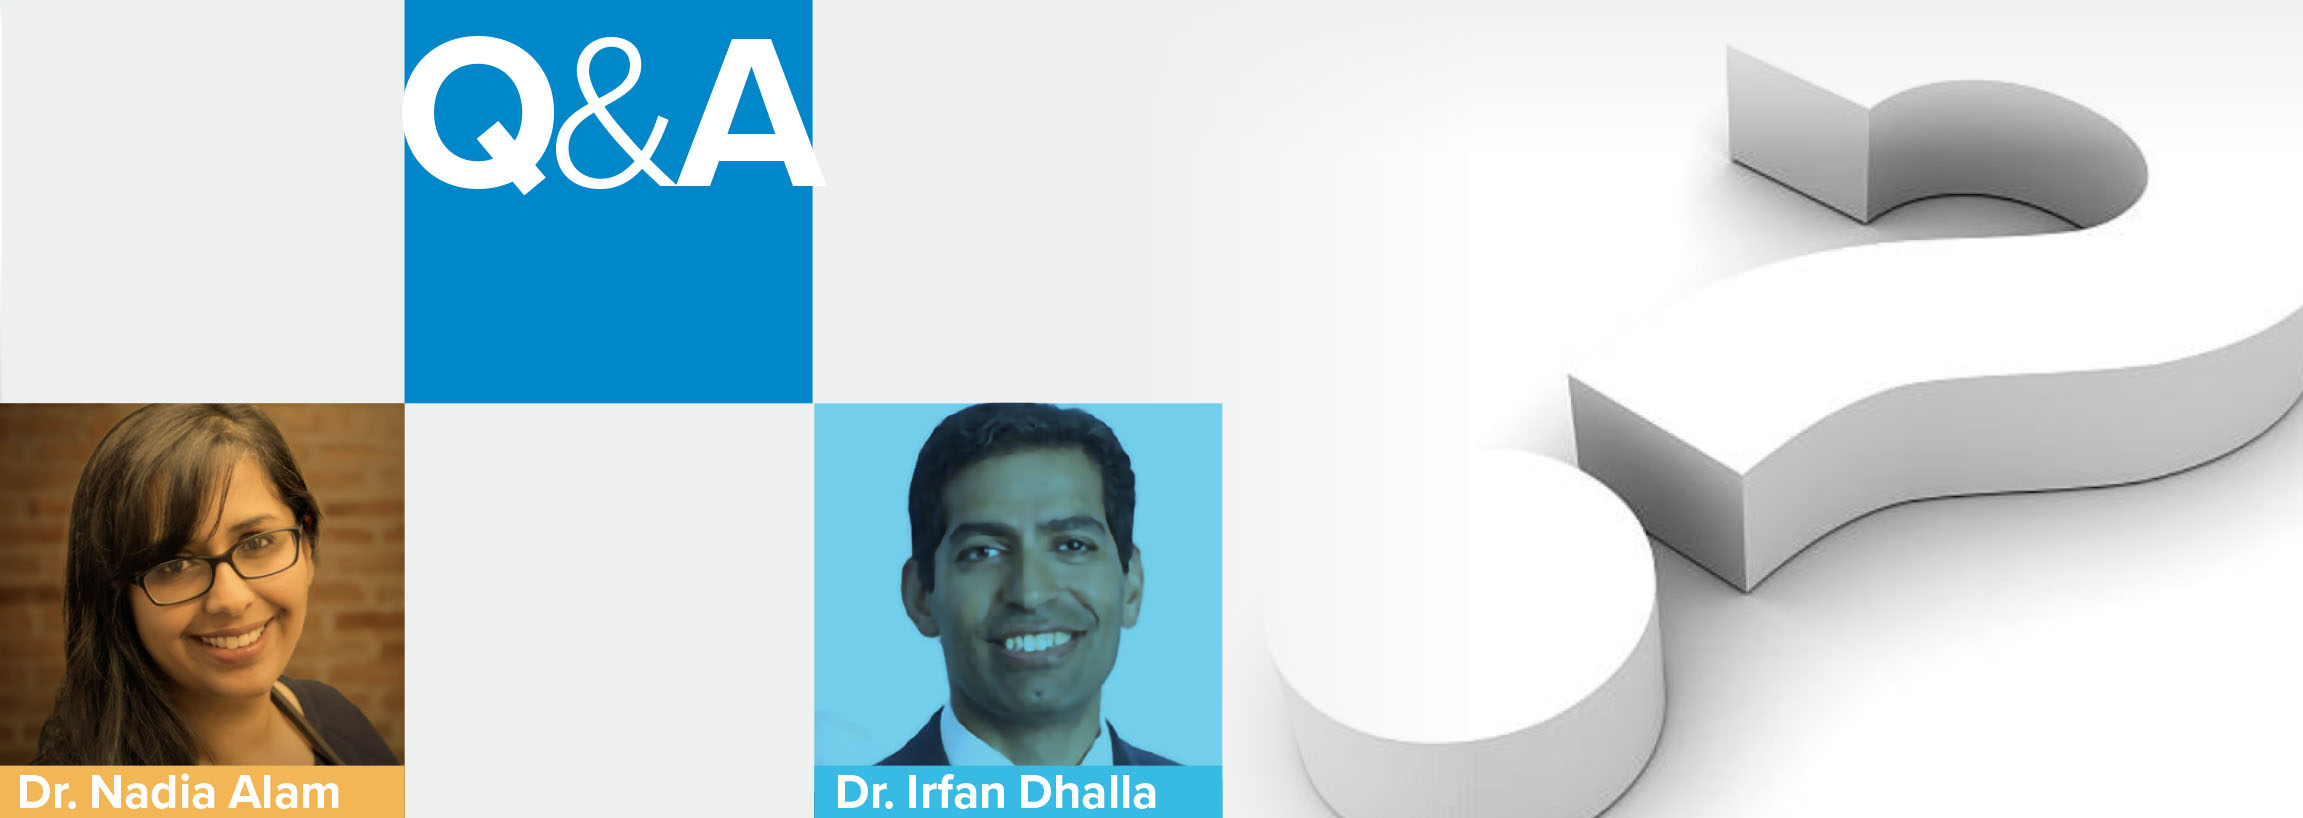 Dr. Nadia Alam and Dr. Irfan Dhalla